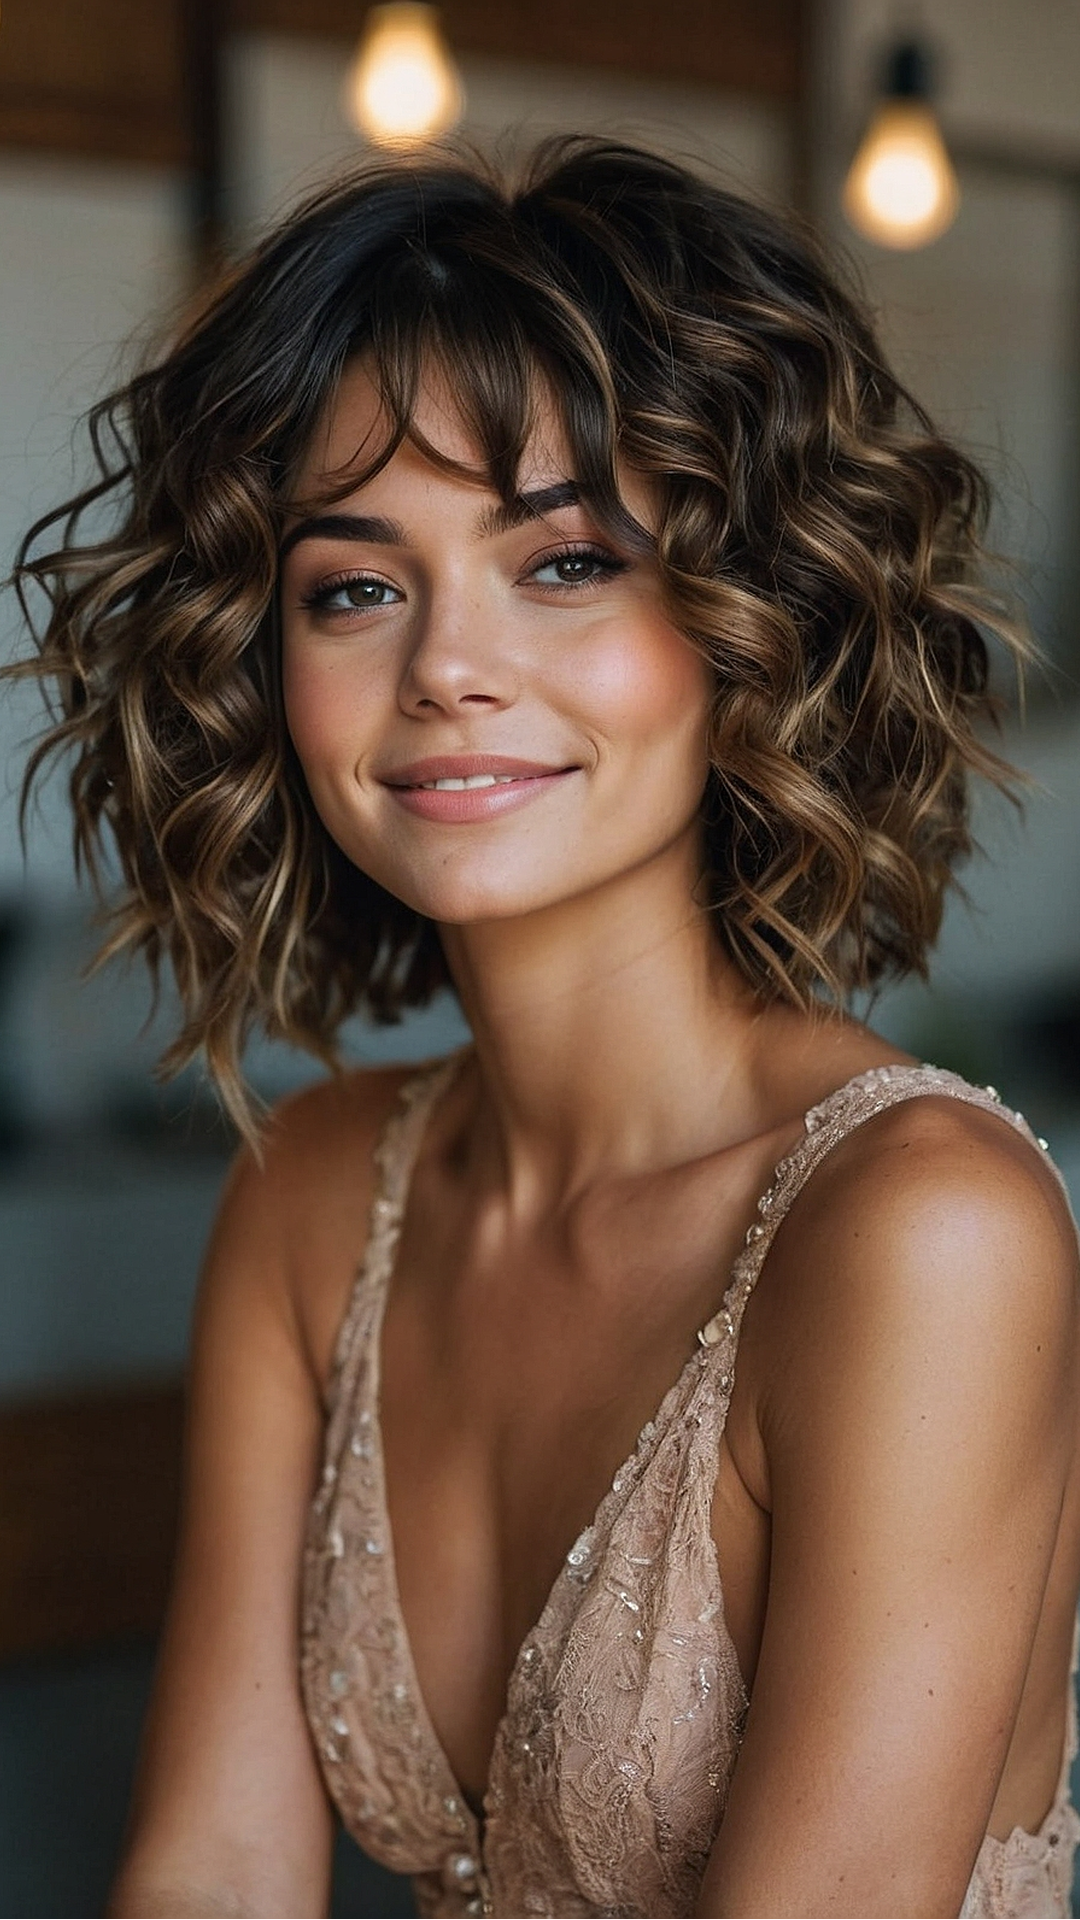 Sleek and Chic: Thin Hair Hairstyles to Love